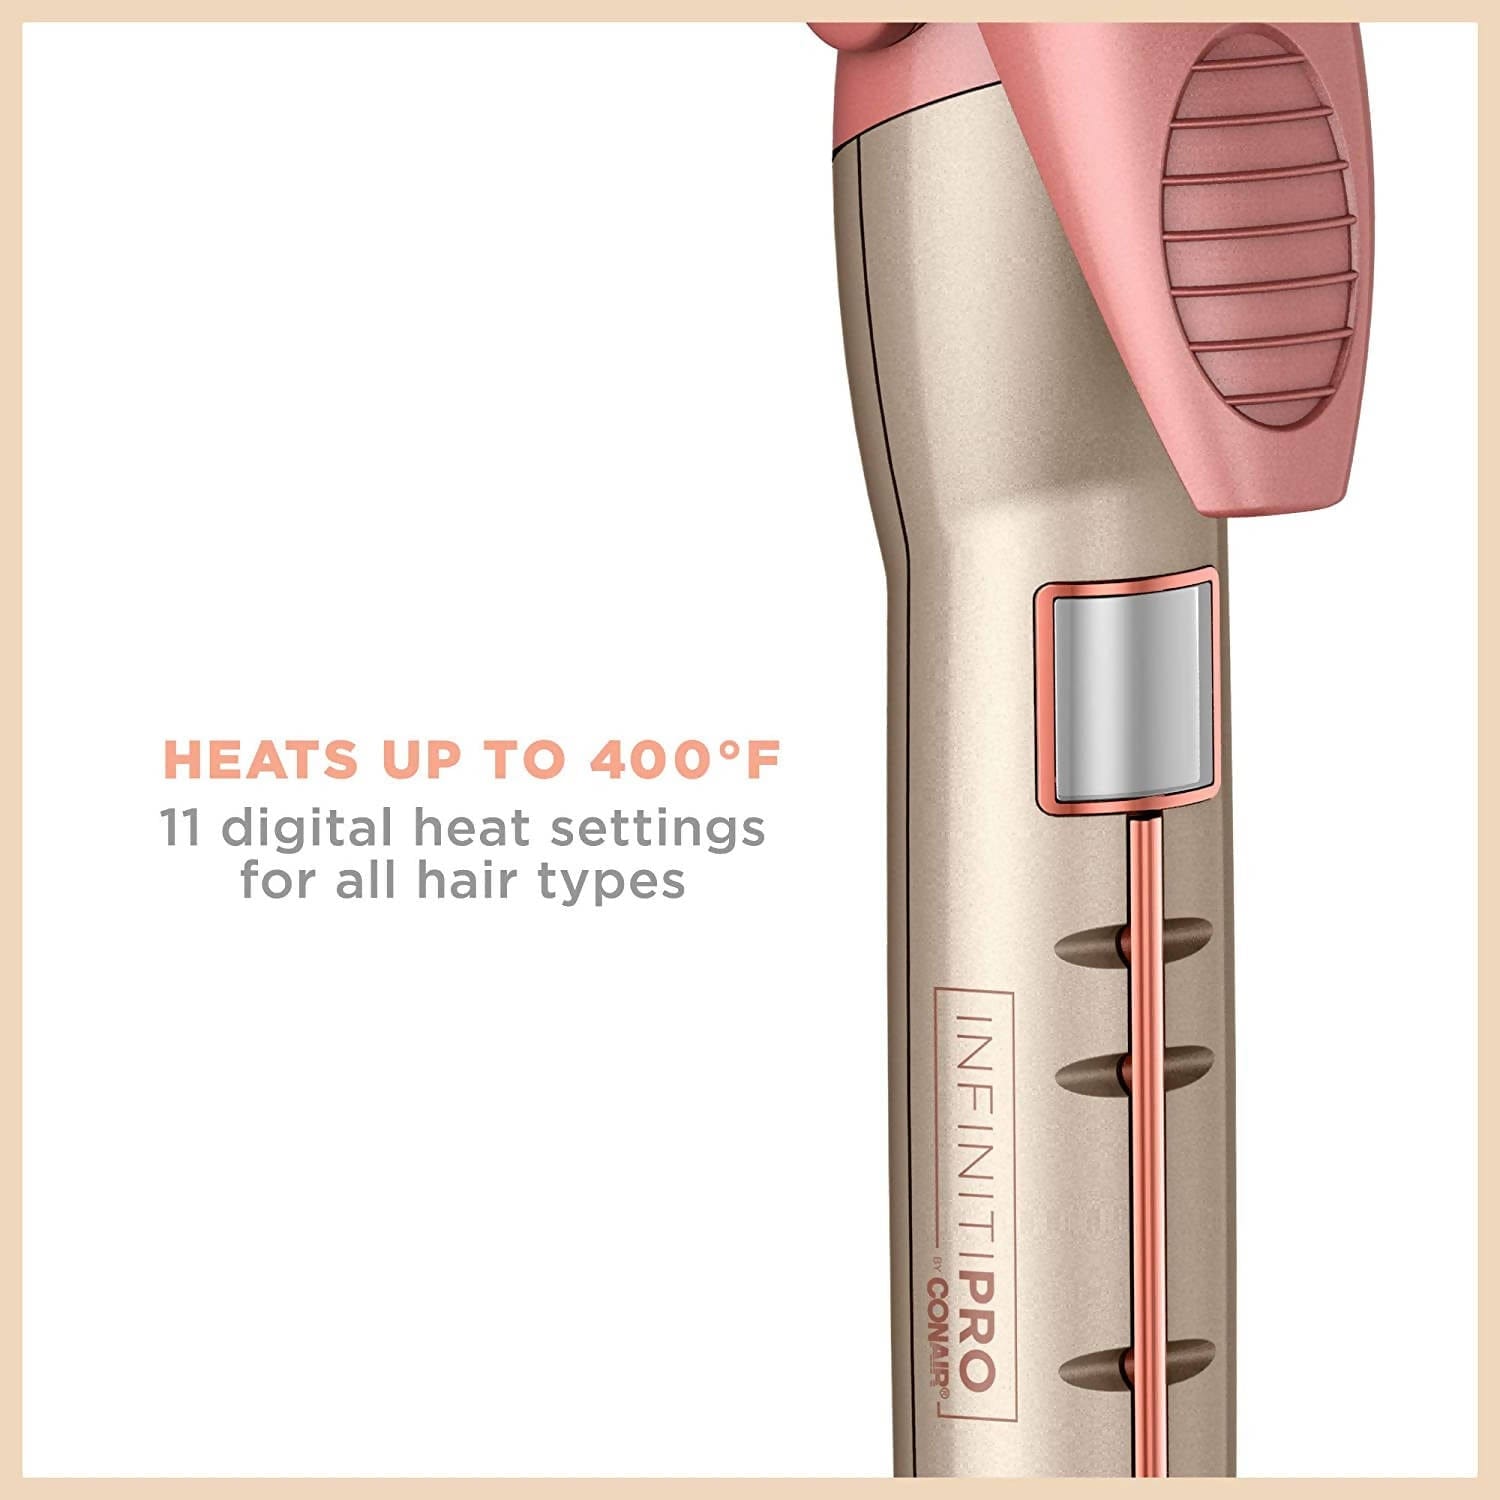 ﻿InfinitiPRO by Conair Frizz-Free 1 inch Curling Iron (Rose Gold) Effortlessly Define and Refine your curls with Frizz-Free Results - C-CD600